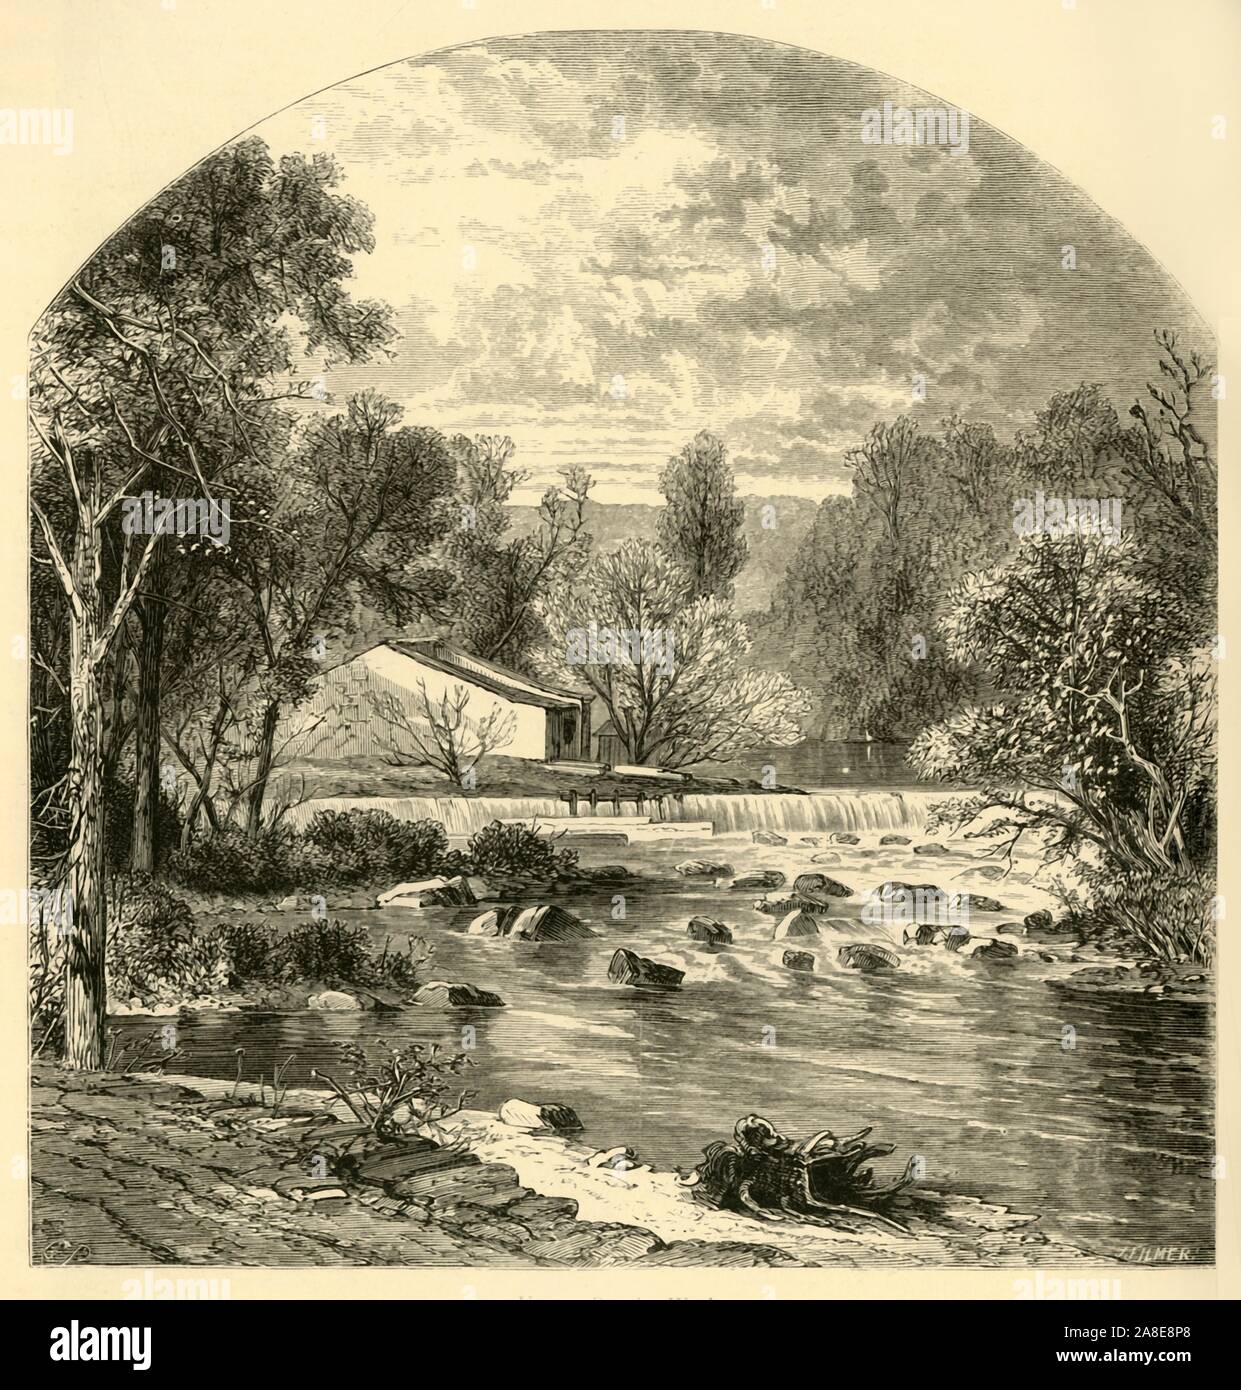 'Upper Powder-Works', 1872. Gunpowder mill on the Brandywine Creek, Delaware, USA. The Eleutherian Mills, used for the manufacture of explosives, were founded by the Du Pont family in the early 19th century. From &quot;Picturesque America; or, The Land We Live In, A Delineation by Pen and Pencil of the Mountains, Rivers, Lakes...with Illustrations on Steel and Wood by Eminent American Artists&quot; Vol. I, edited by William Cullen Bryant. [D. Appleton and Company, New York, 1872] Stock Photo